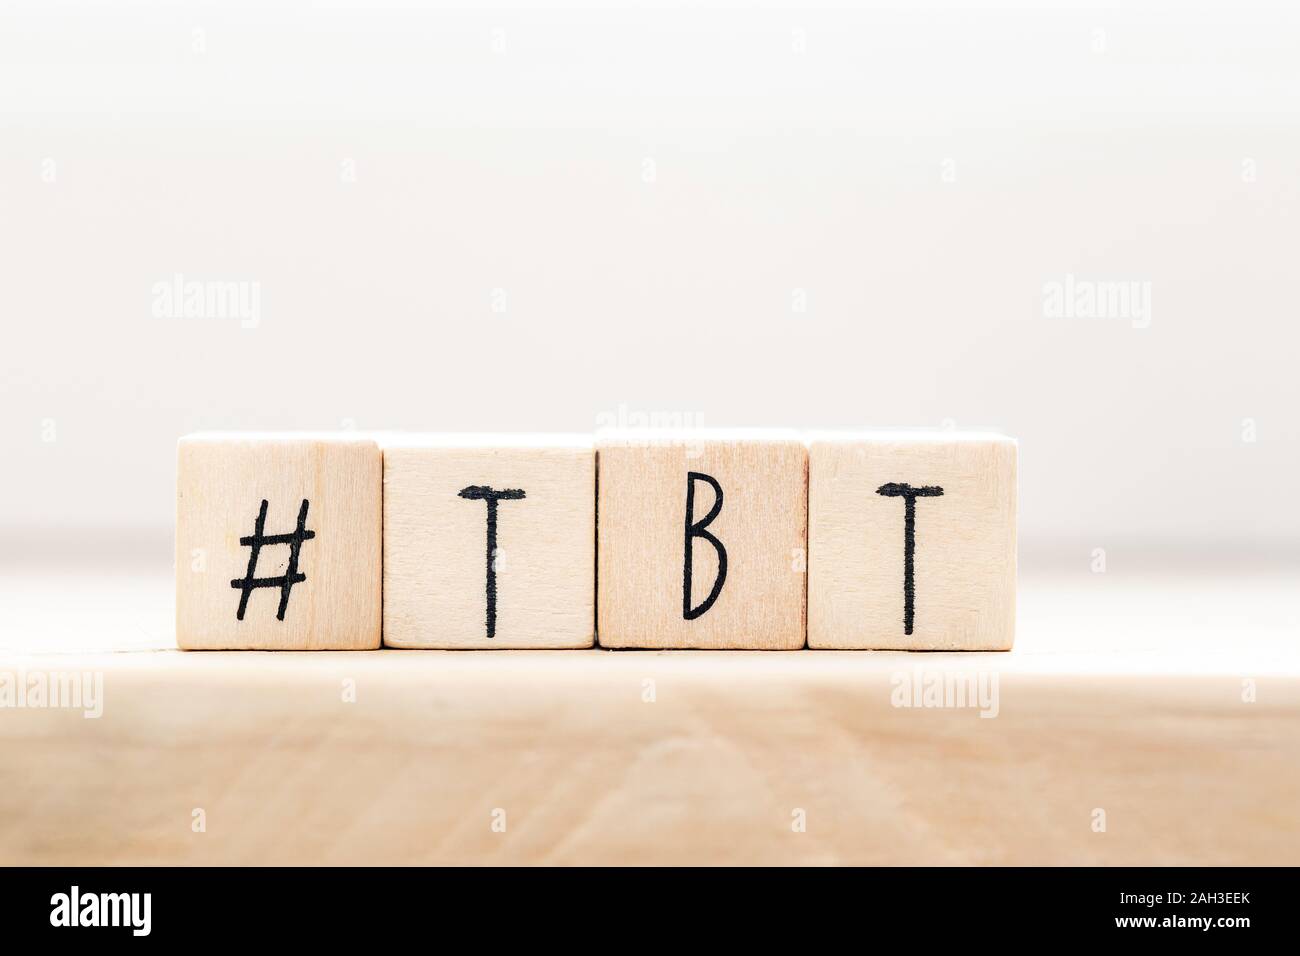 Wooden cubes with Hashtag tbt, meaning Throwback Thursday near white background social media concept Stock Photo